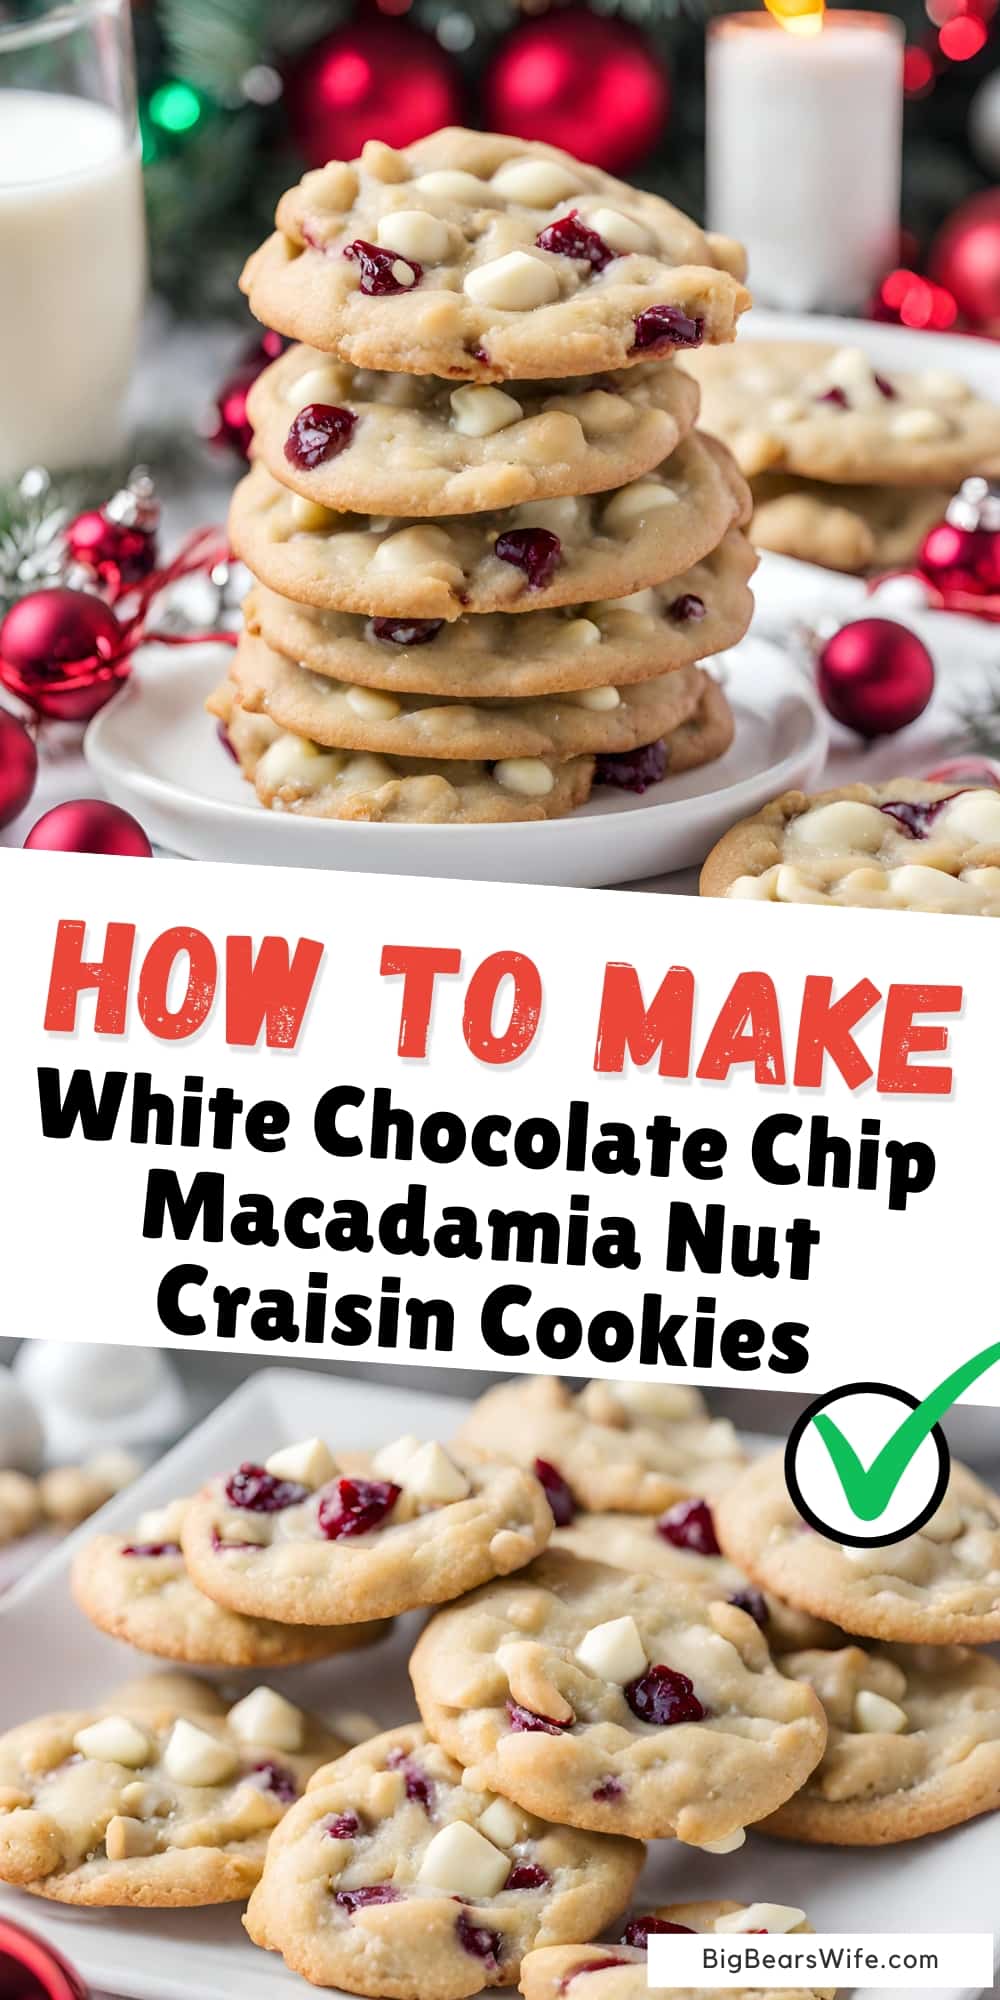 Looking for a new addition to your cookie collection? Look no further! Discover the magic of white chocolate chip macadamia nut craisin cookies and why they deserve a spot in your baking repertoire. With their irresistible combination of creamy white chocolate, buttery macadamia nuts, and tangy craisins, these cookies are sure to become a family favorite. via @bigbearswife